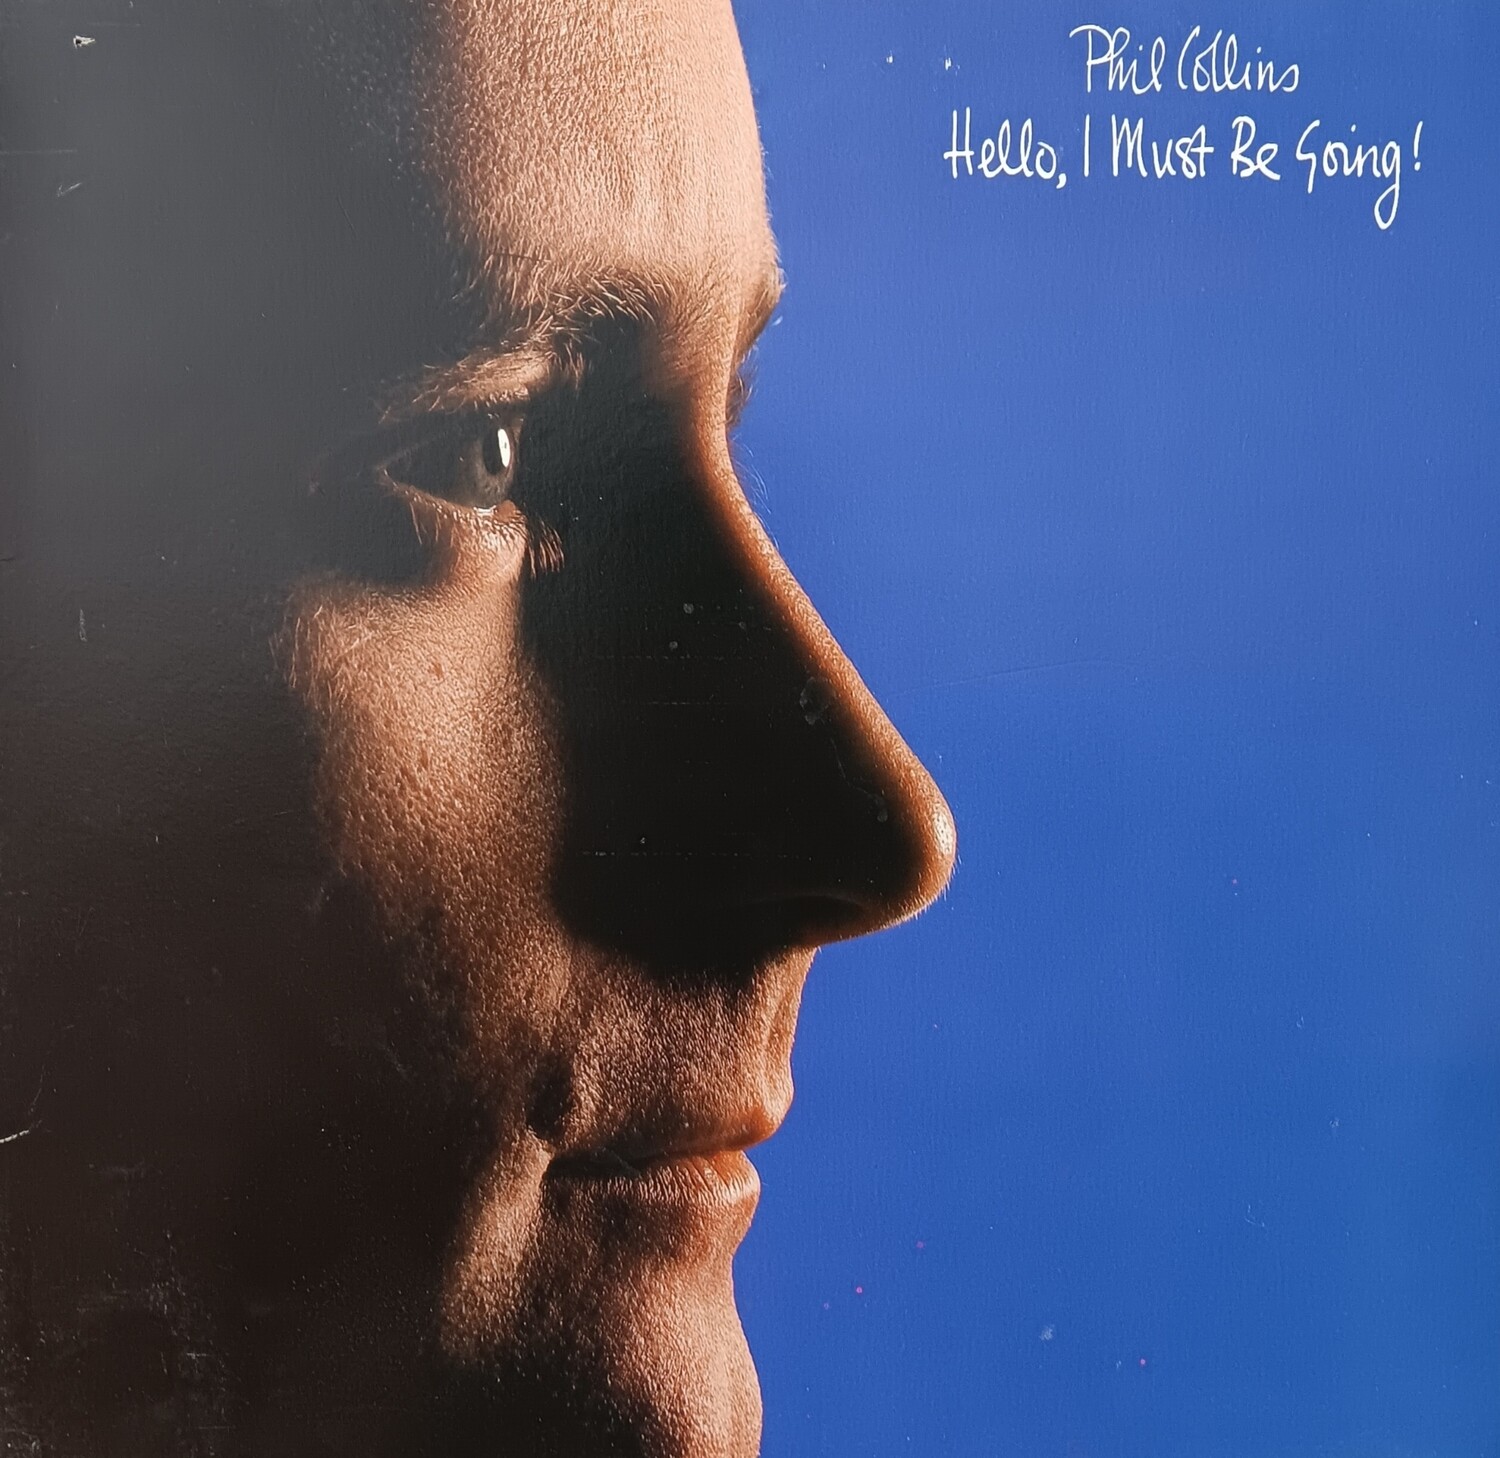 PHIL COLLINS - Hello I must be going